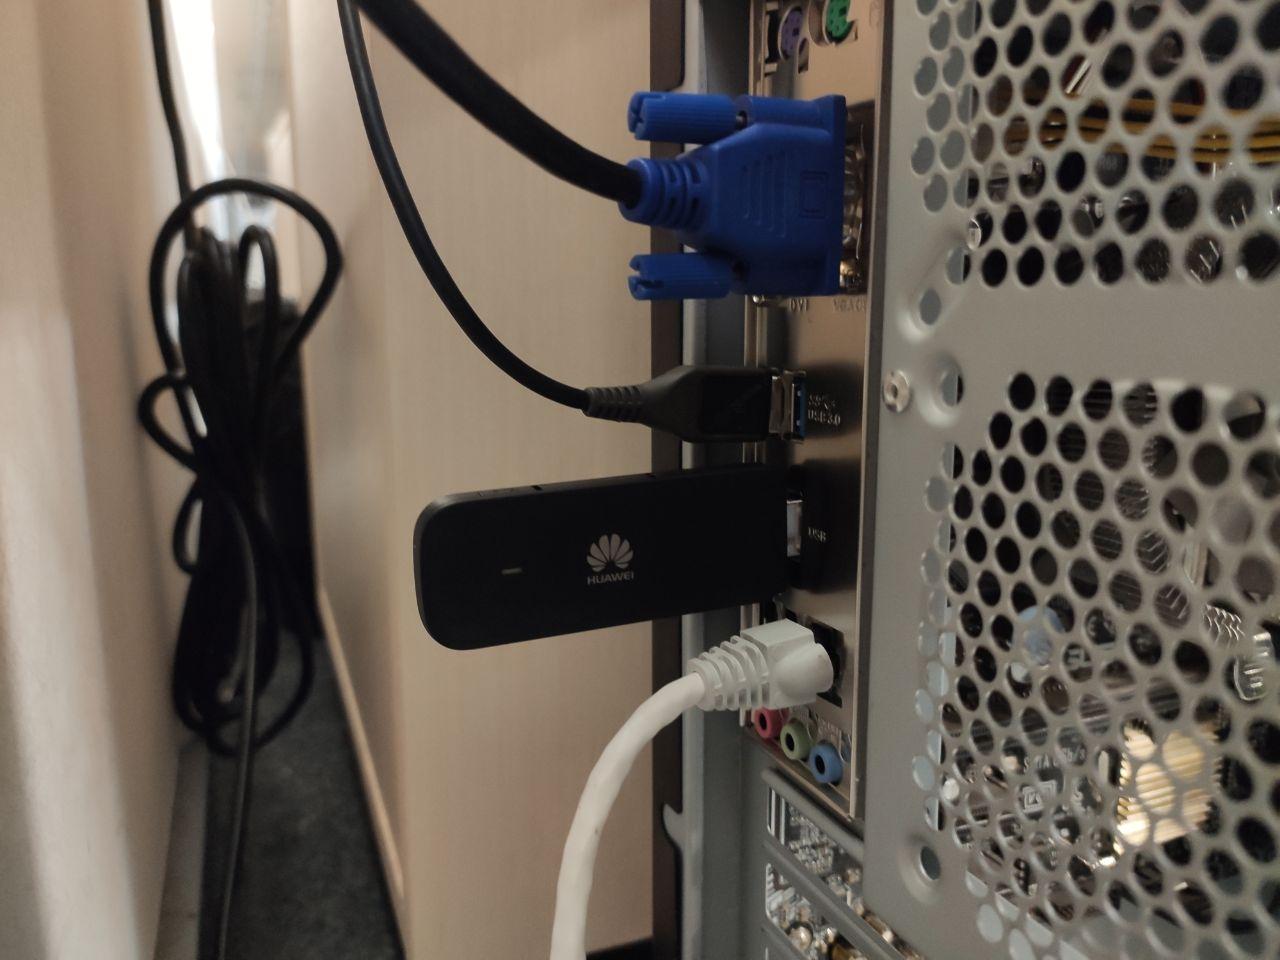 Connecting a backdoor device to the target PC